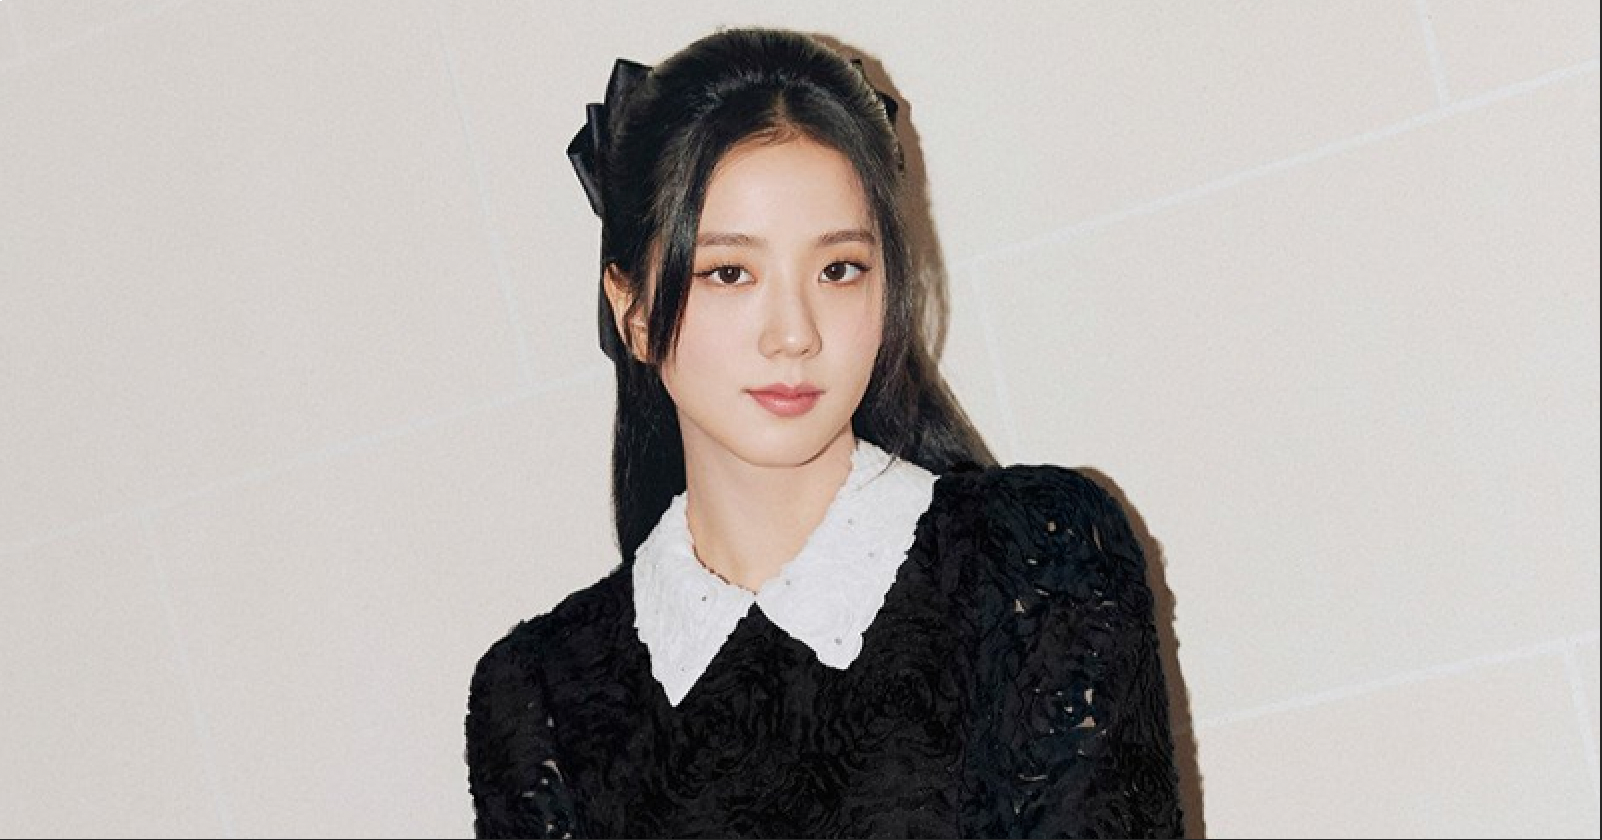 Malicious Commenter Claims BLACKPINK Jisoo Sued Them, Faces Backlash Instead for Supposedly Forging Documents